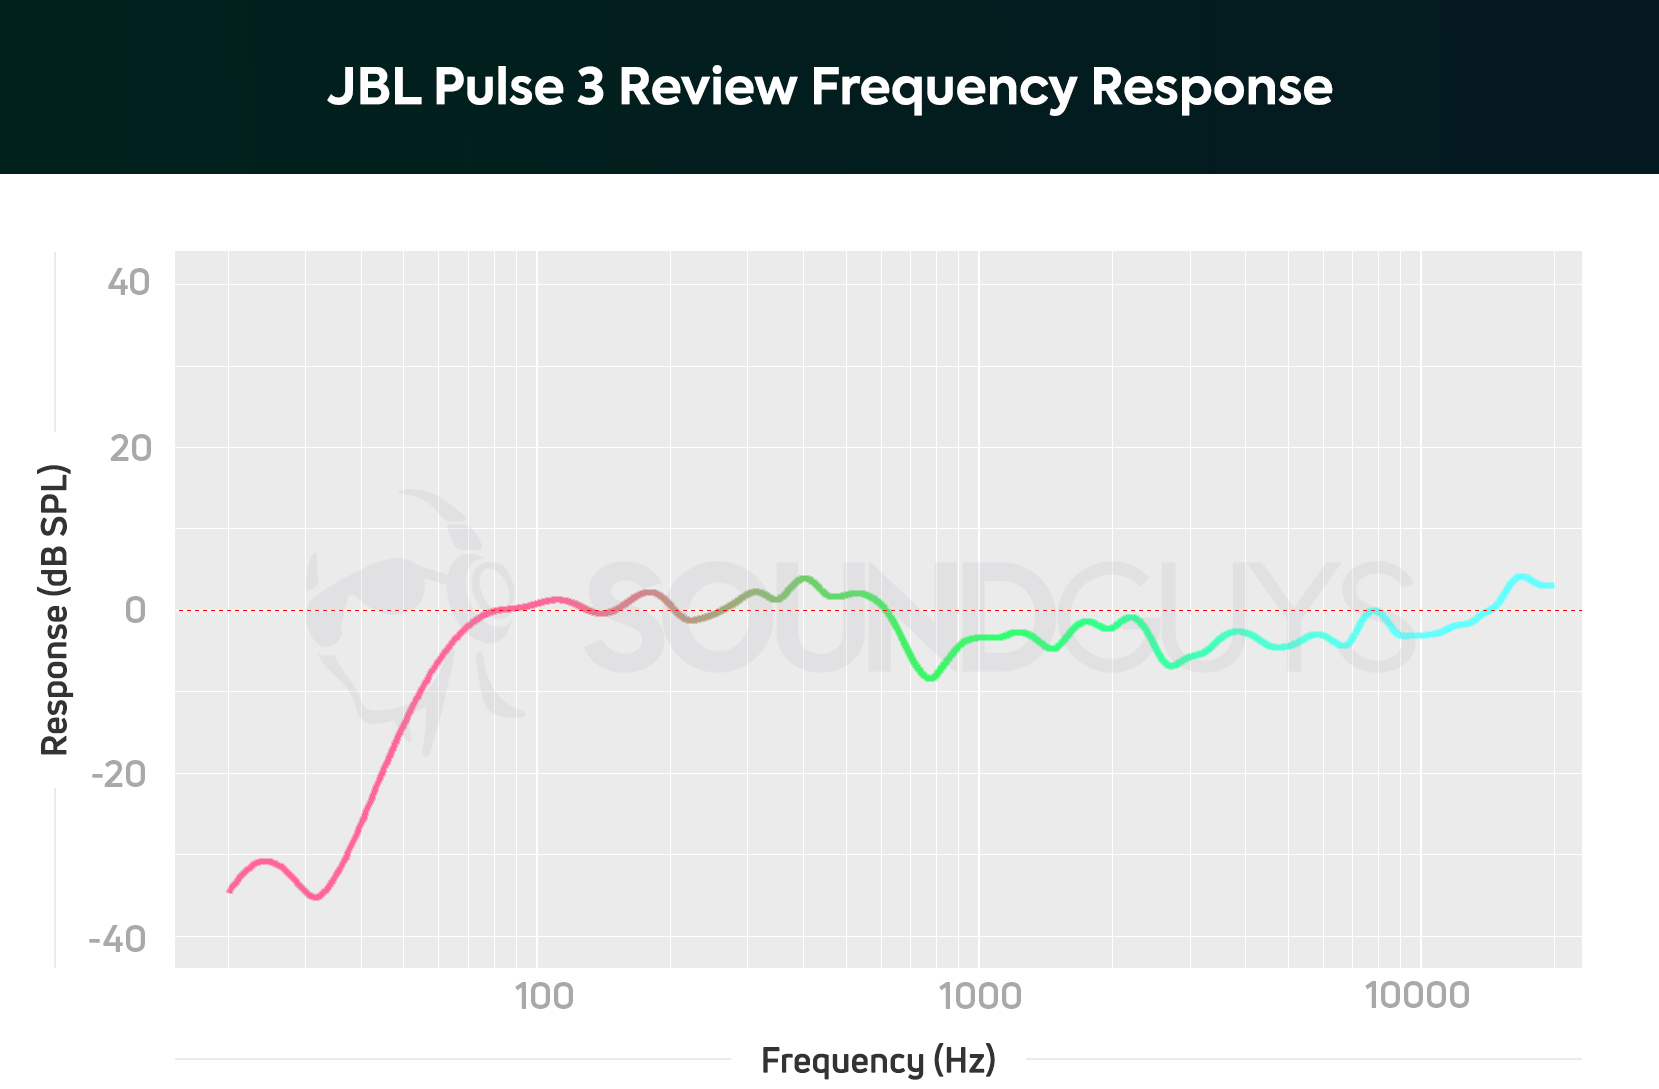 The frequency response of the Pulse 3 shows a weak emphasis in lower notes, but gives fairly consistent power to the mids and highs.